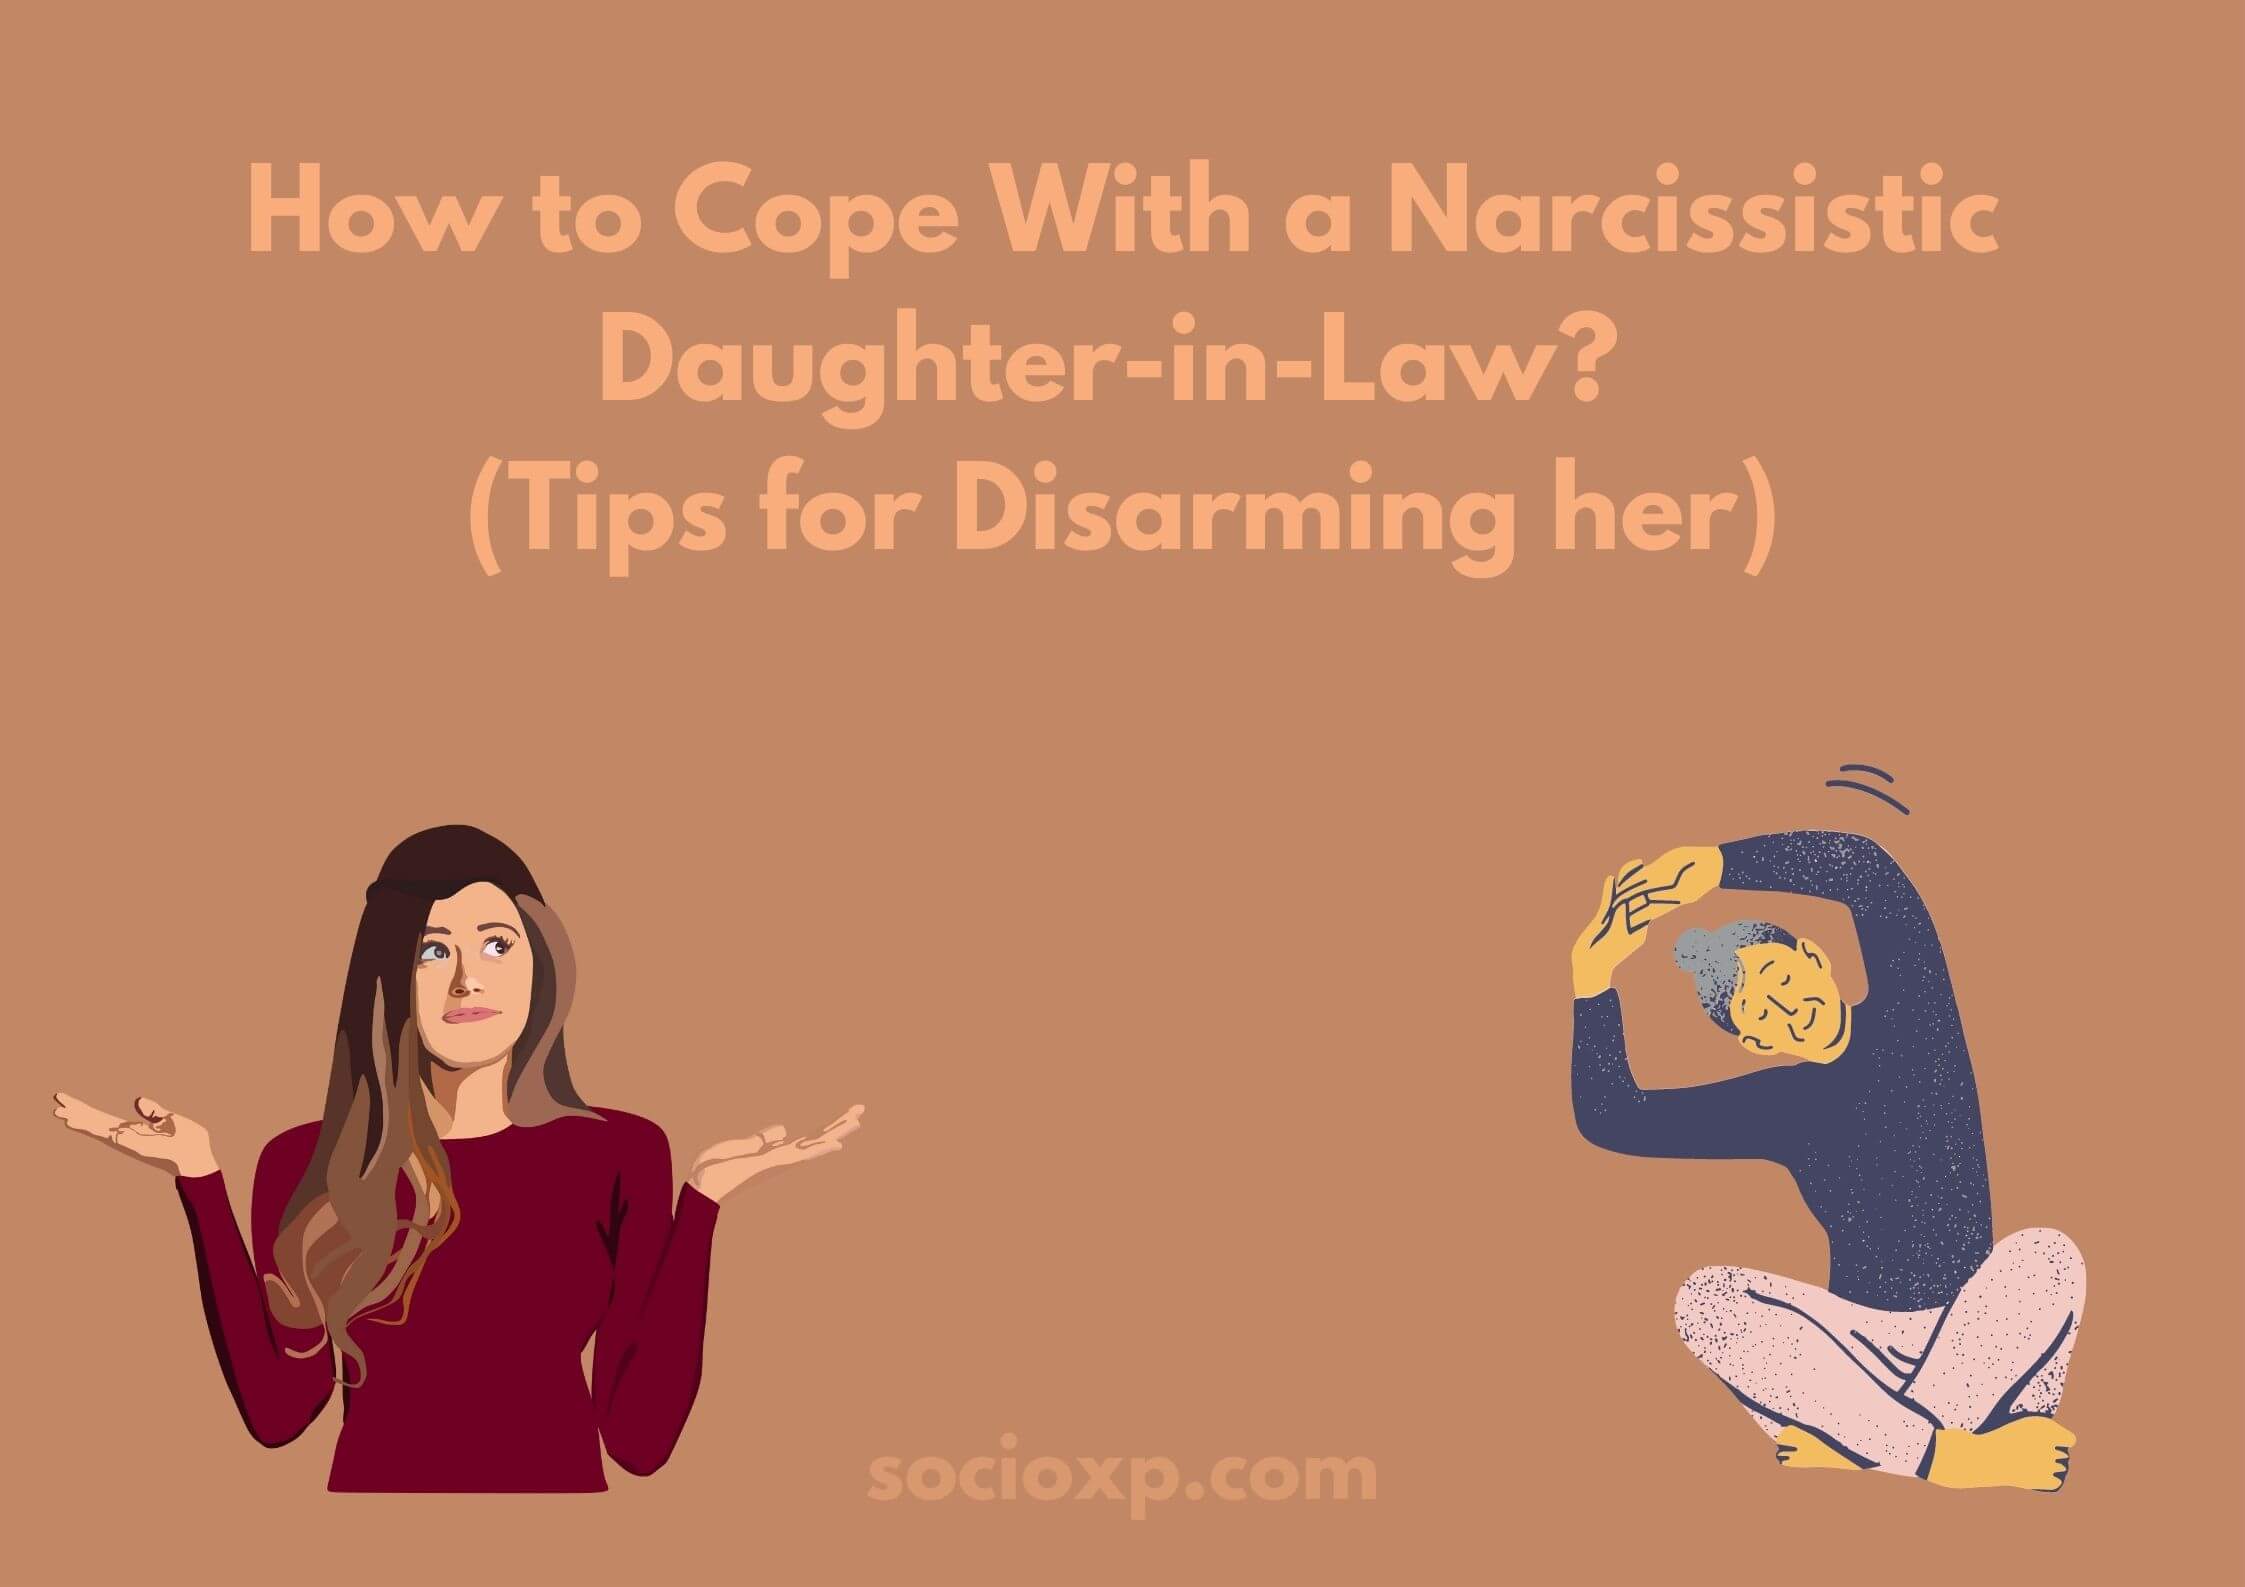 How to Cope With a Narcissistic Daughter-in-Law? (Tips for Disarming her)